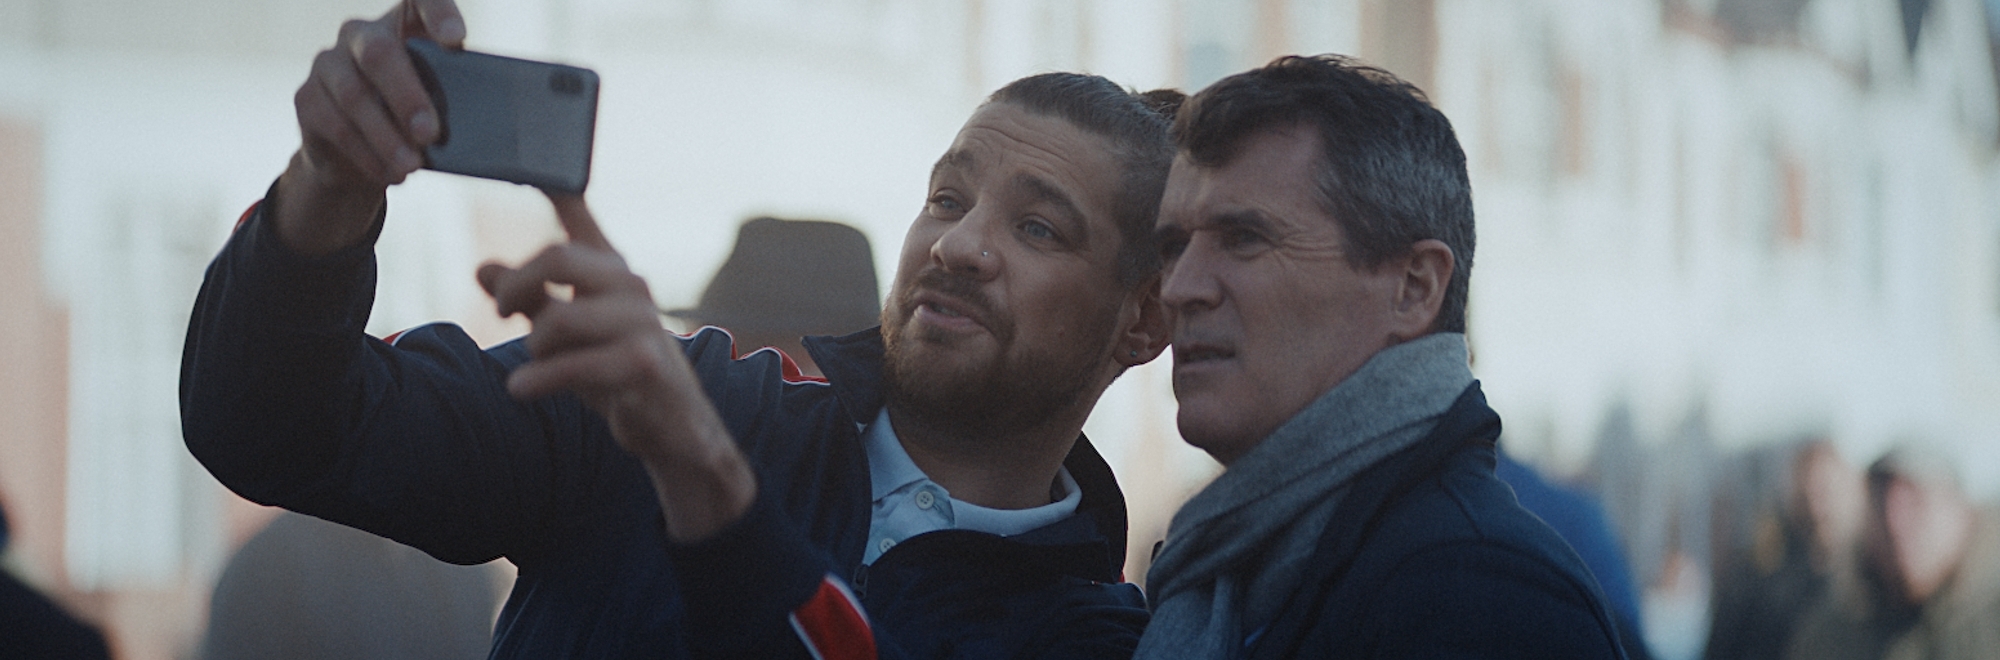 Roy Keane and Sky Bet show that nothing should get in the way of the beautiful game